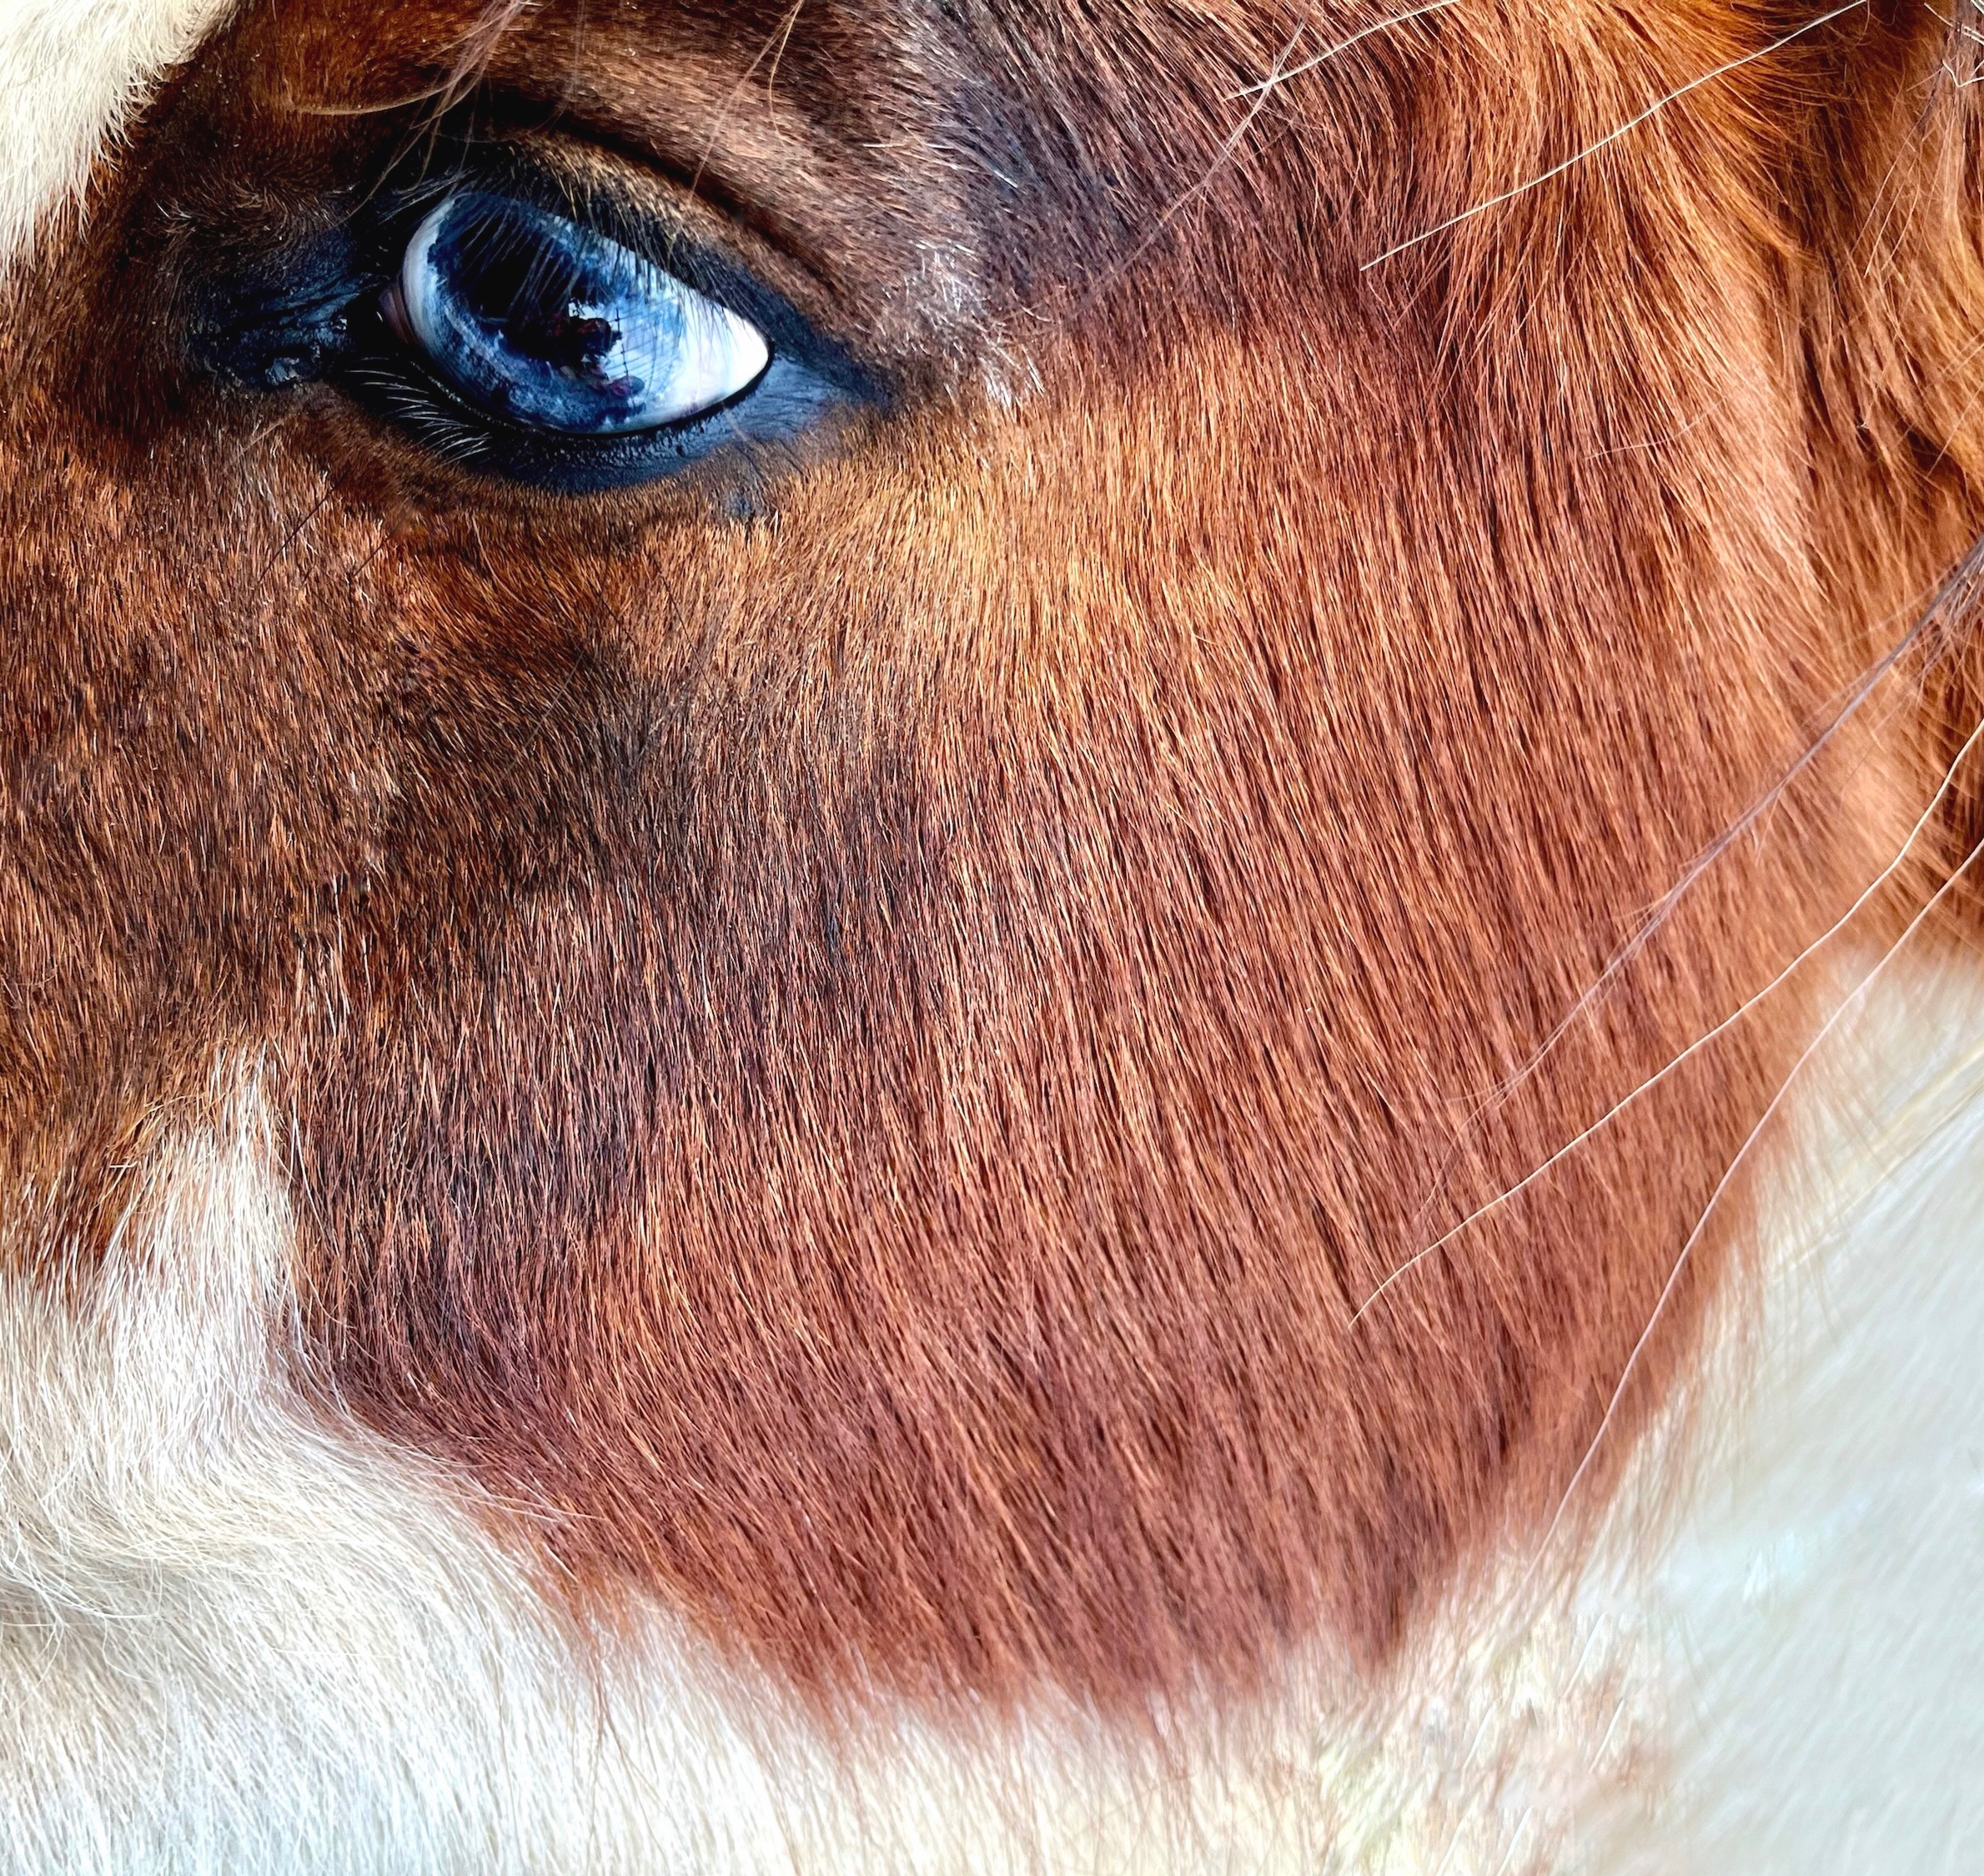 A close up of a horse's face.